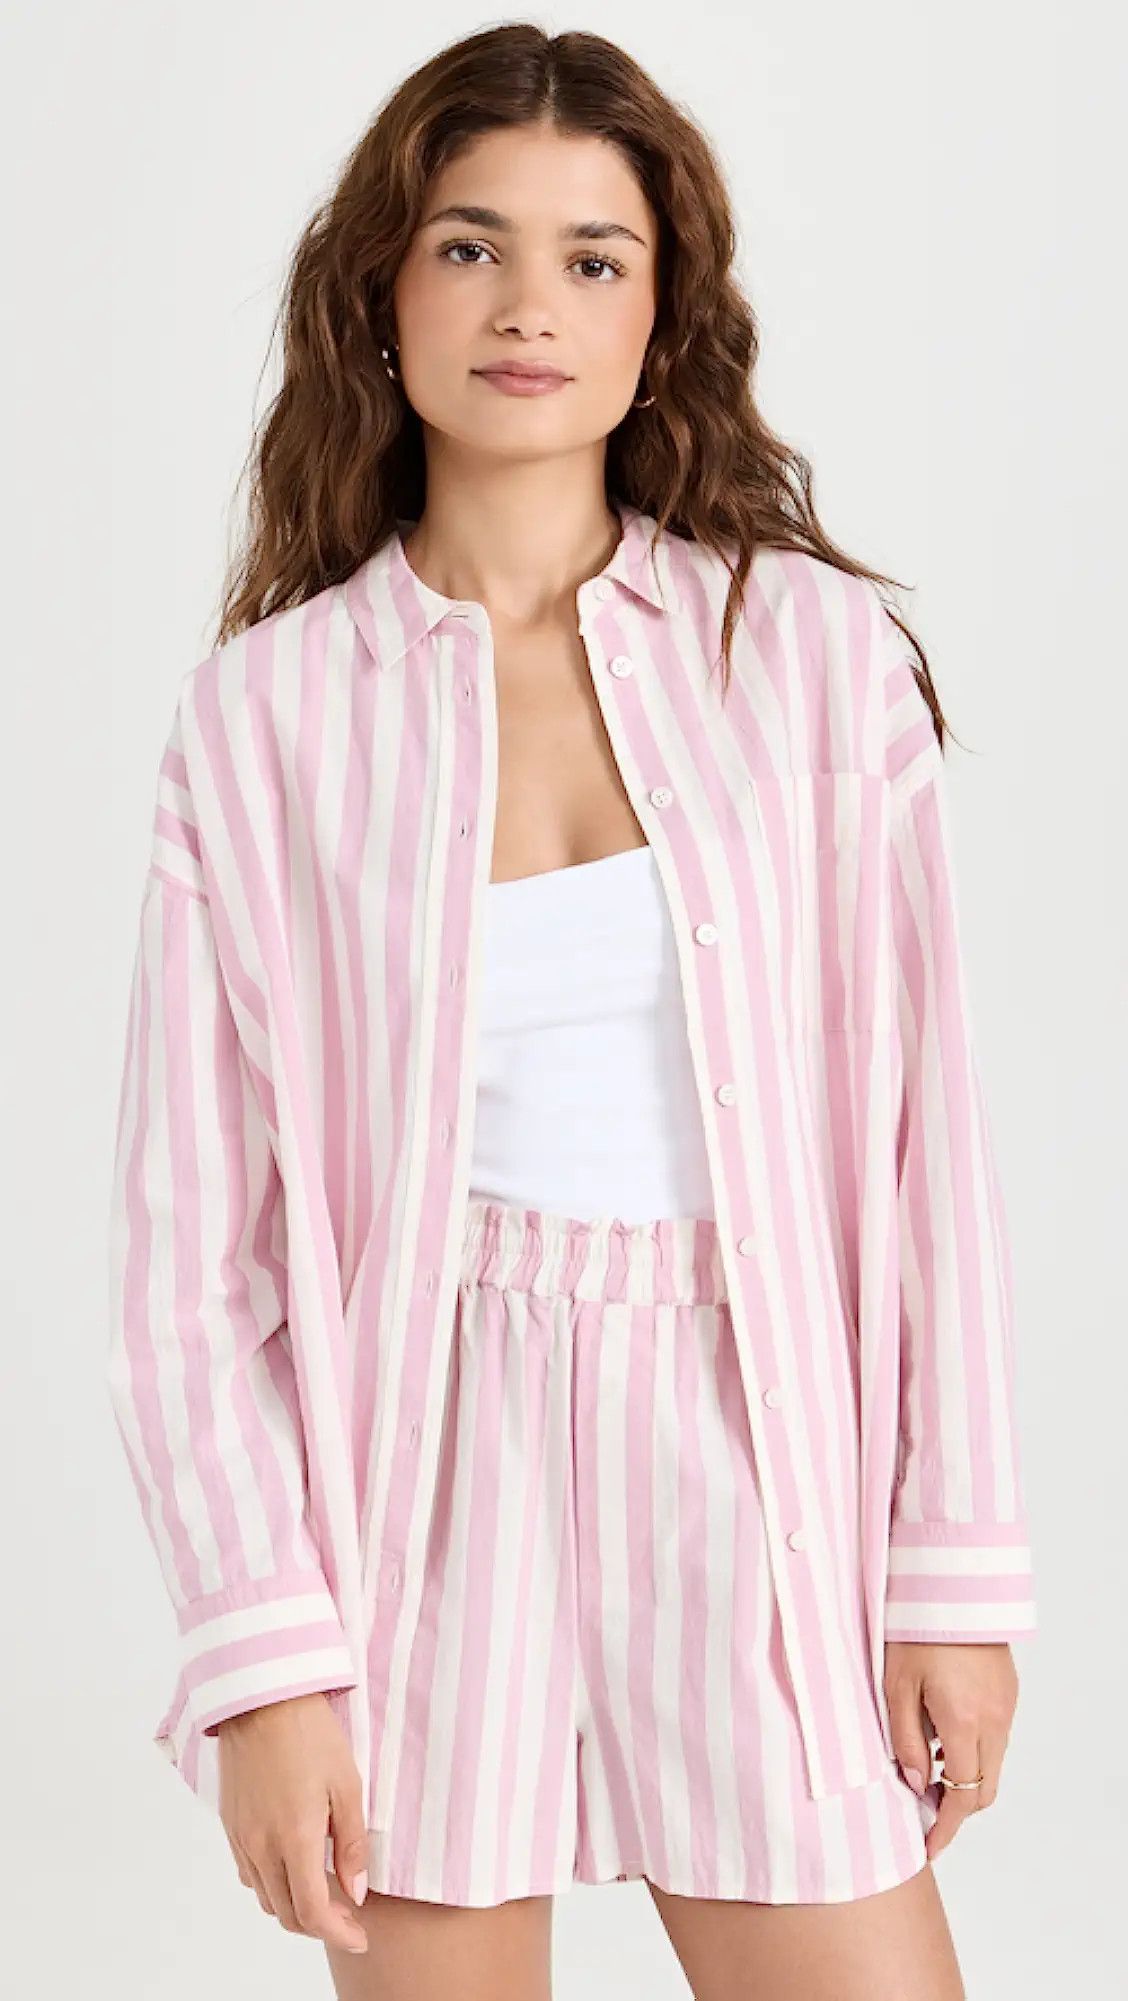 Madewell The Signature Poplin Oversized Shirt in Springy Stripe | Shopbop | Shopbop